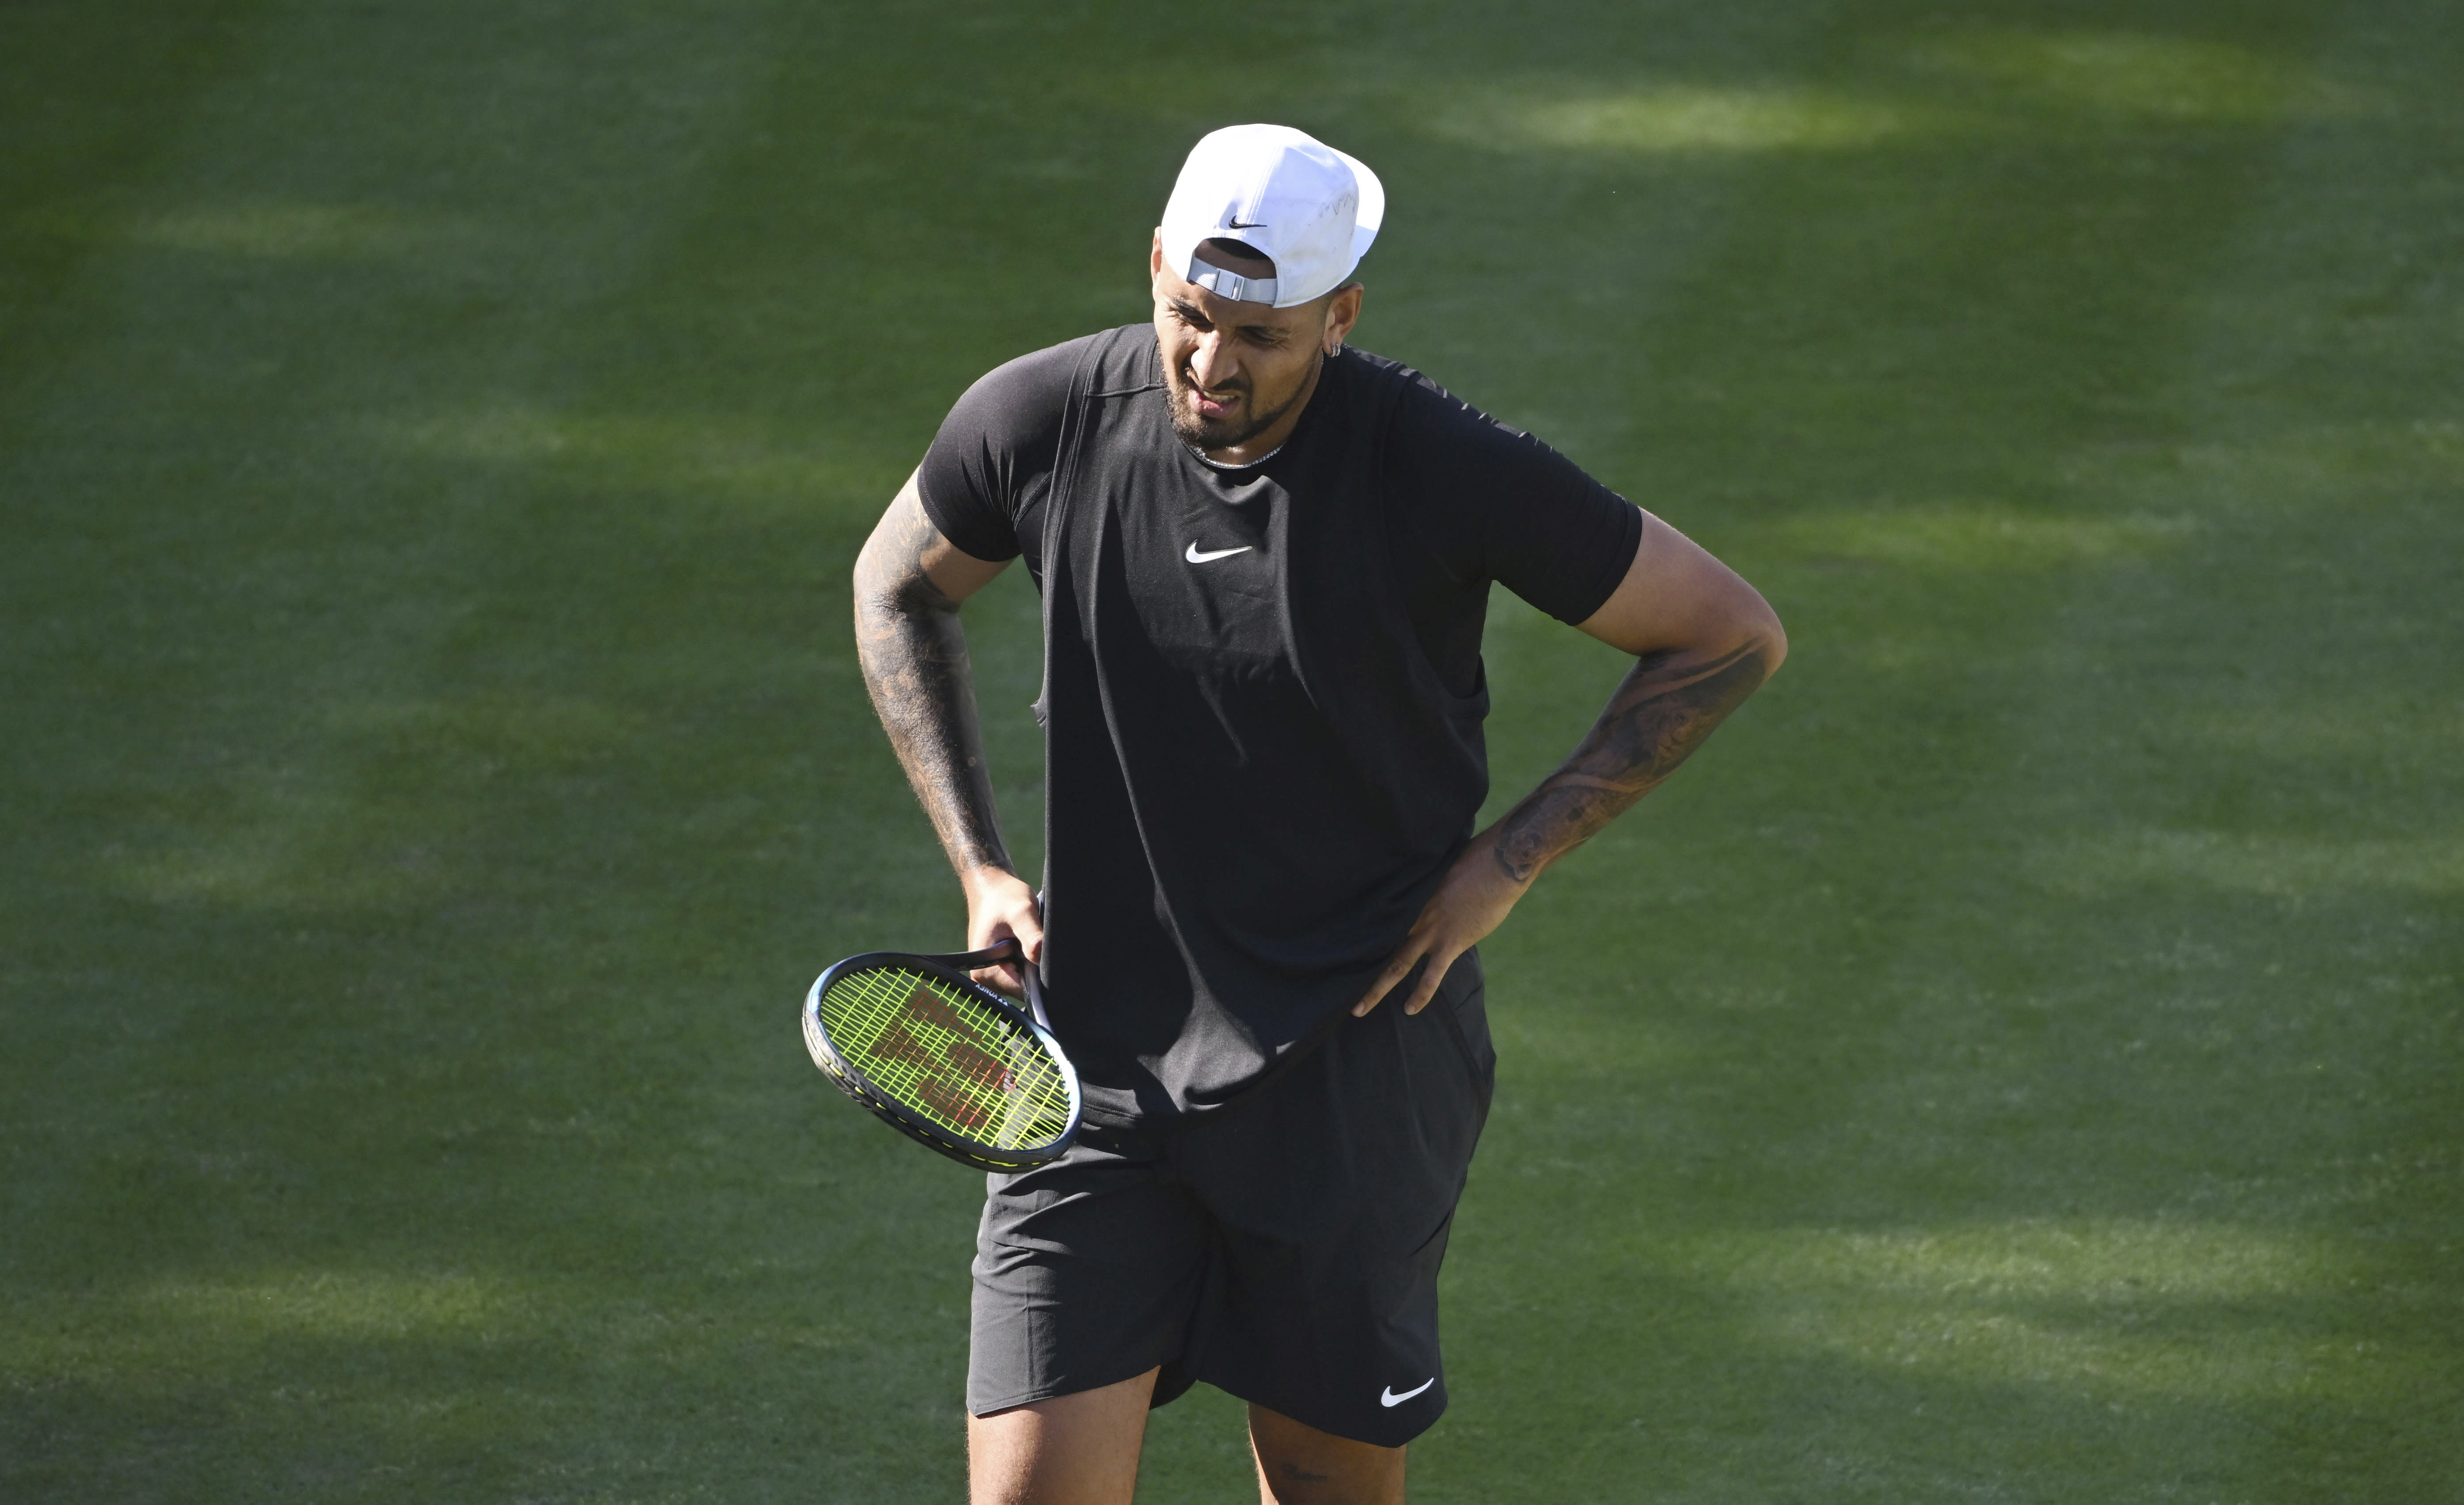 With Wimbledon on his mind, Nick Kyrgios pulls out of Halle to give left knee more time